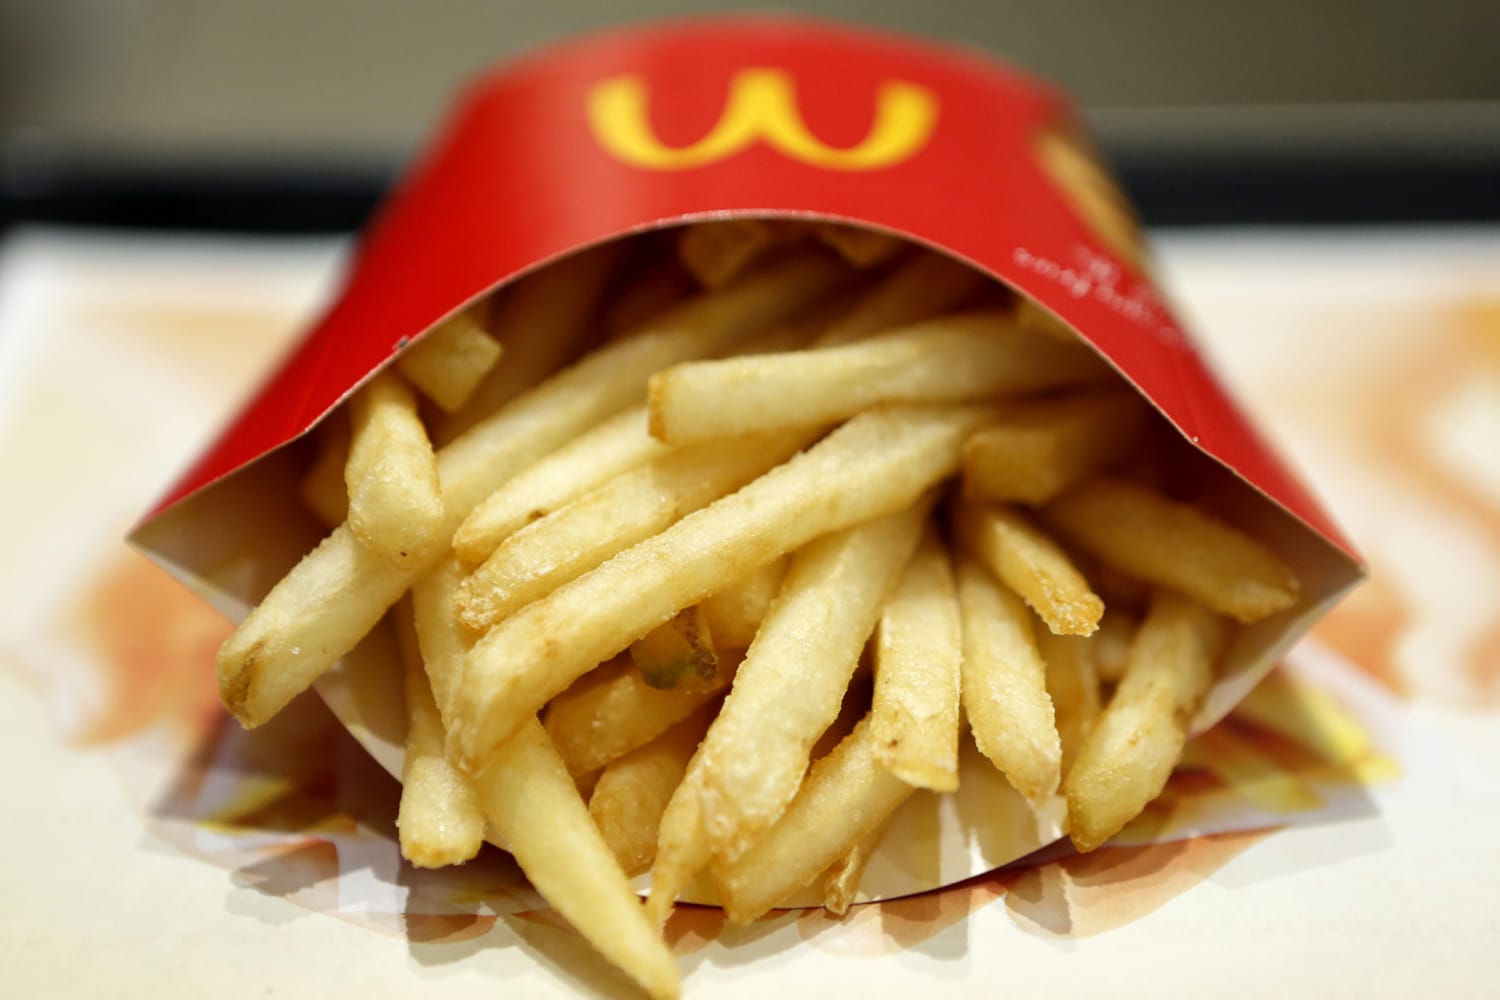 Japan is running low on McDonald's french fries, but has too much milk as  supply chain issues hit